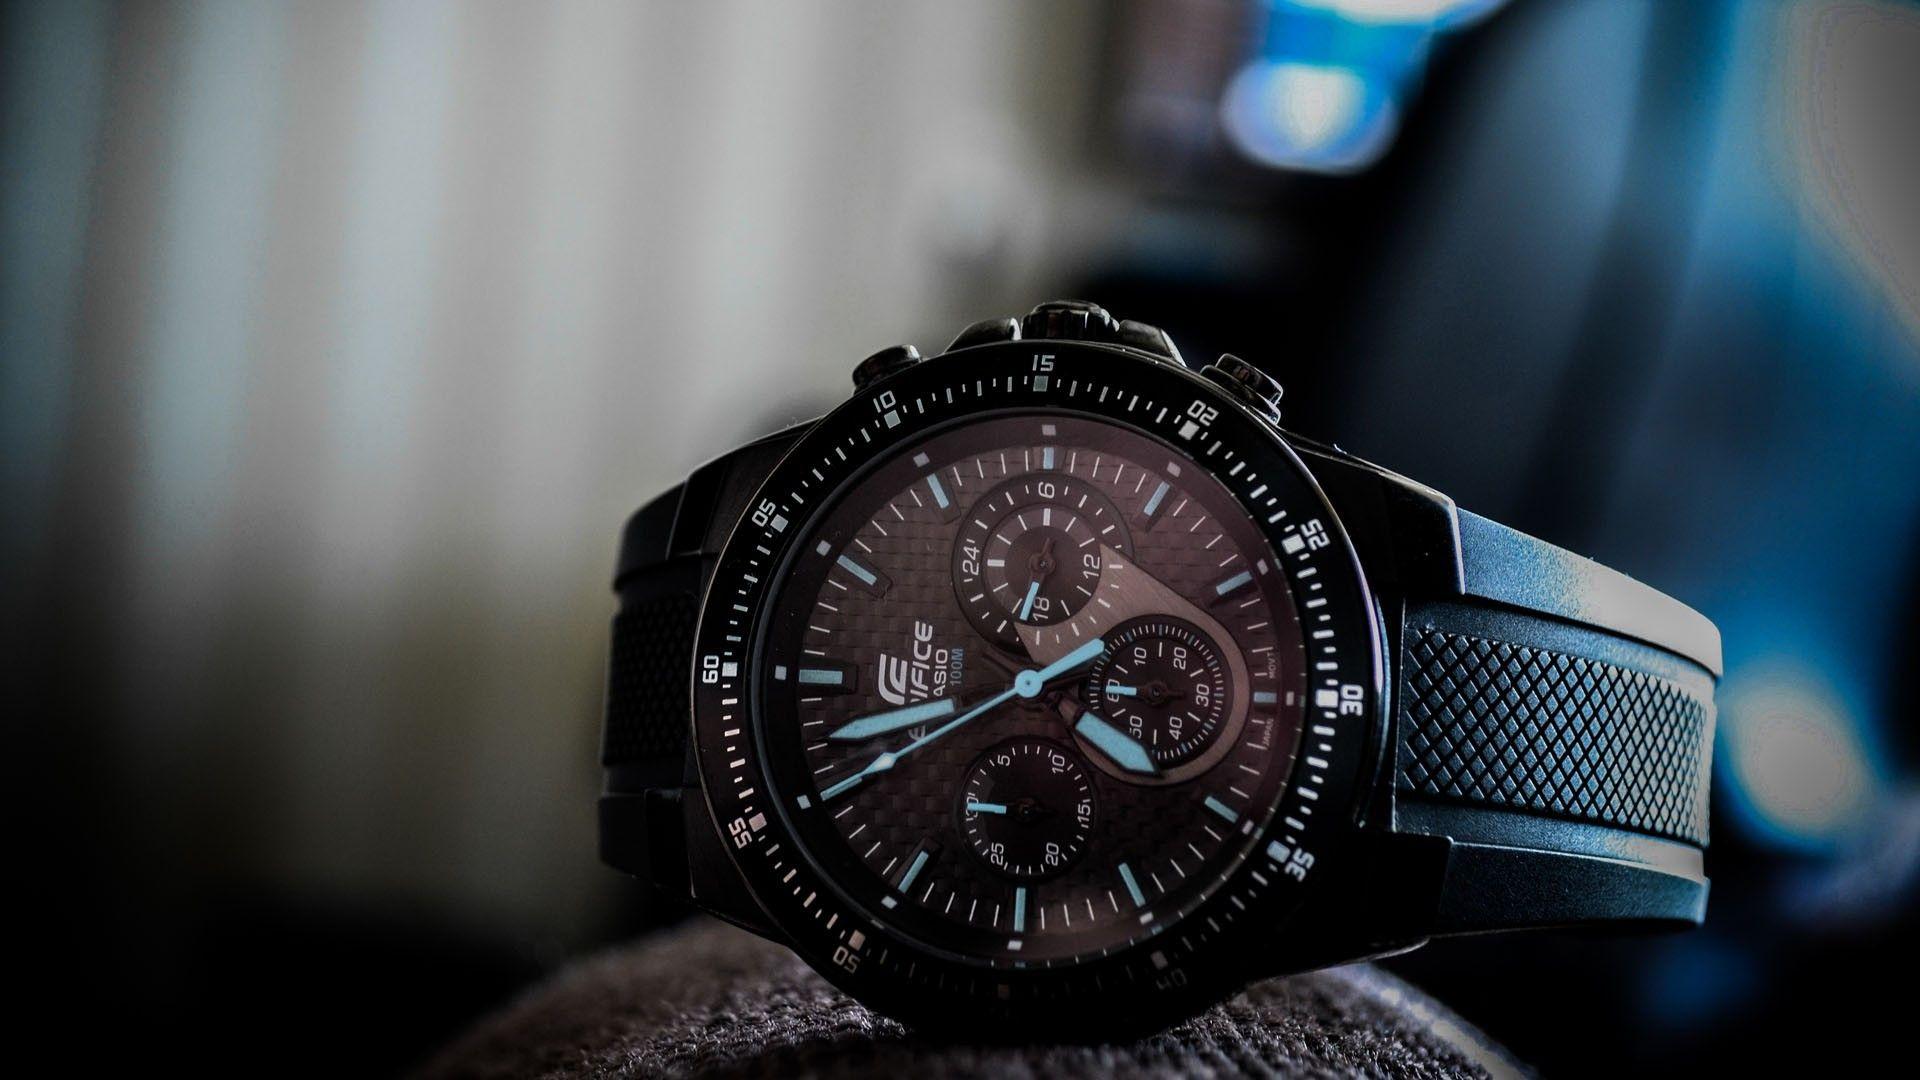 Watch company Casio wallpapers and image